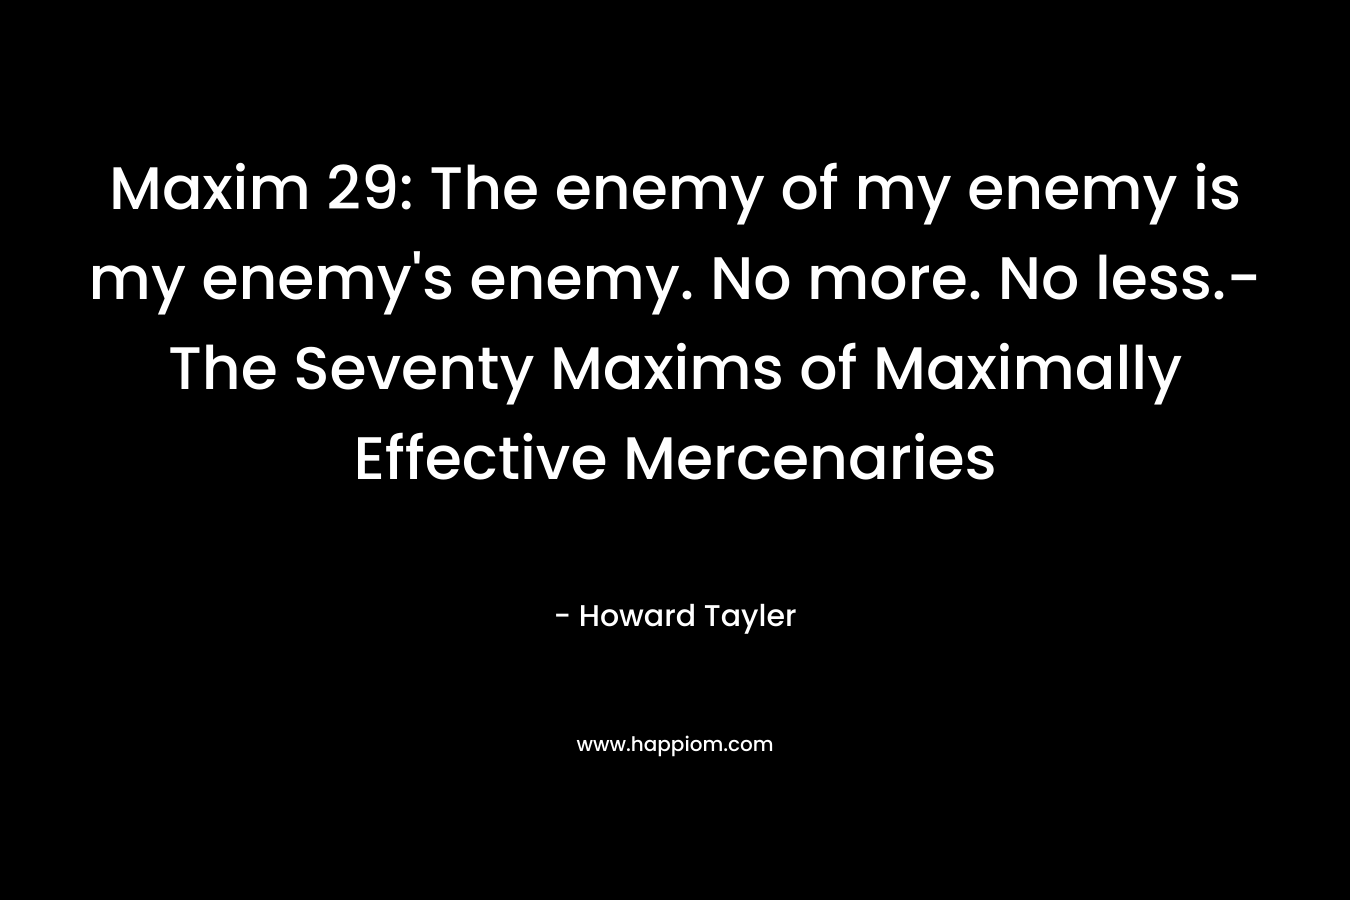 Maxim 29: The enemy of my enemy is my enemy's enemy. No more. No less.-The Seventy Maxims of Maximally Effective Mercenaries